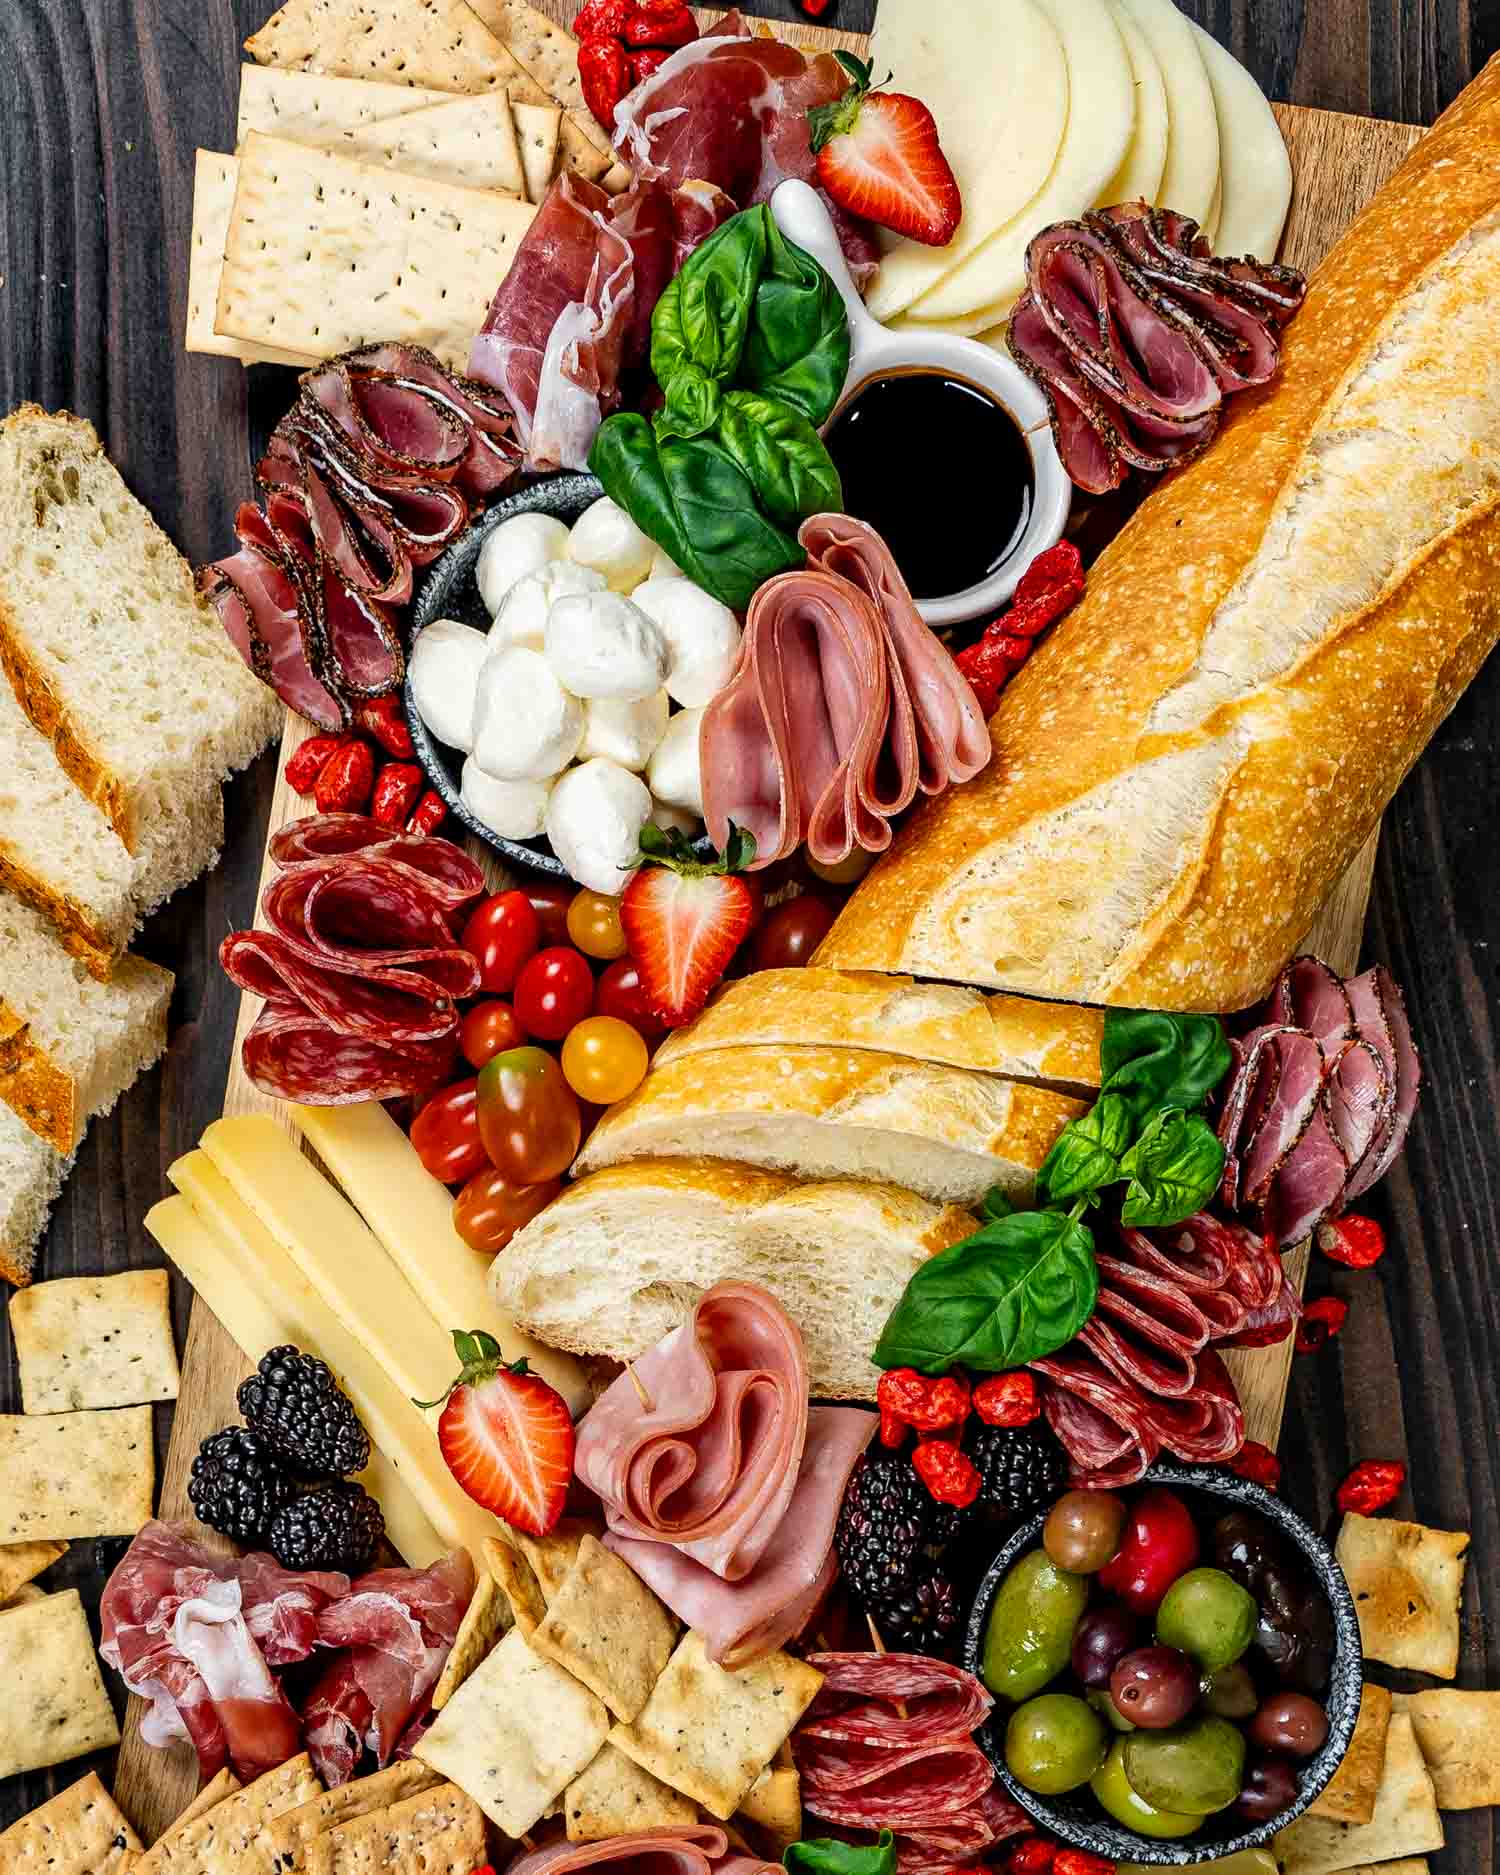 an antipasto platter loaded with salami, deli meats, mix of olives, cheeses, crackers and nuts.